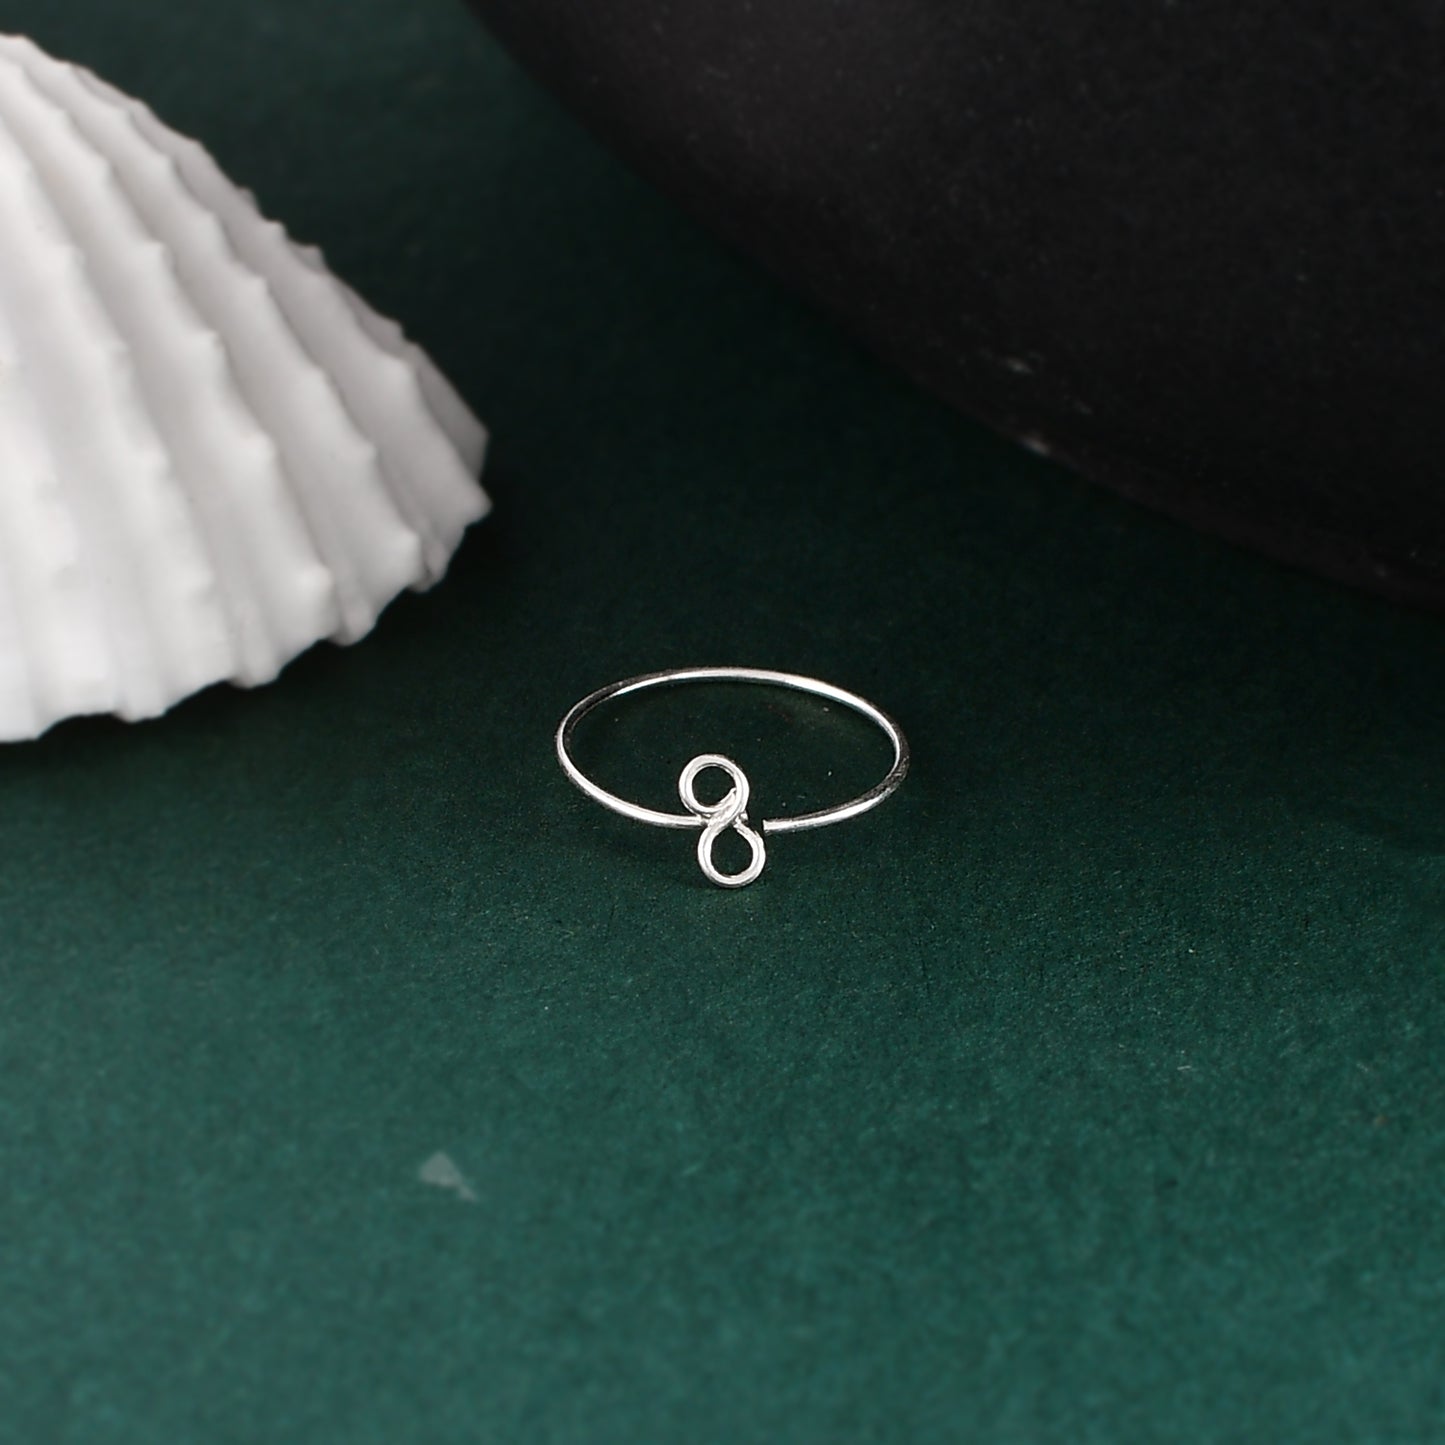 Women's Handmade Sterling Silver 925 Infinity Nose Ring - 10mm